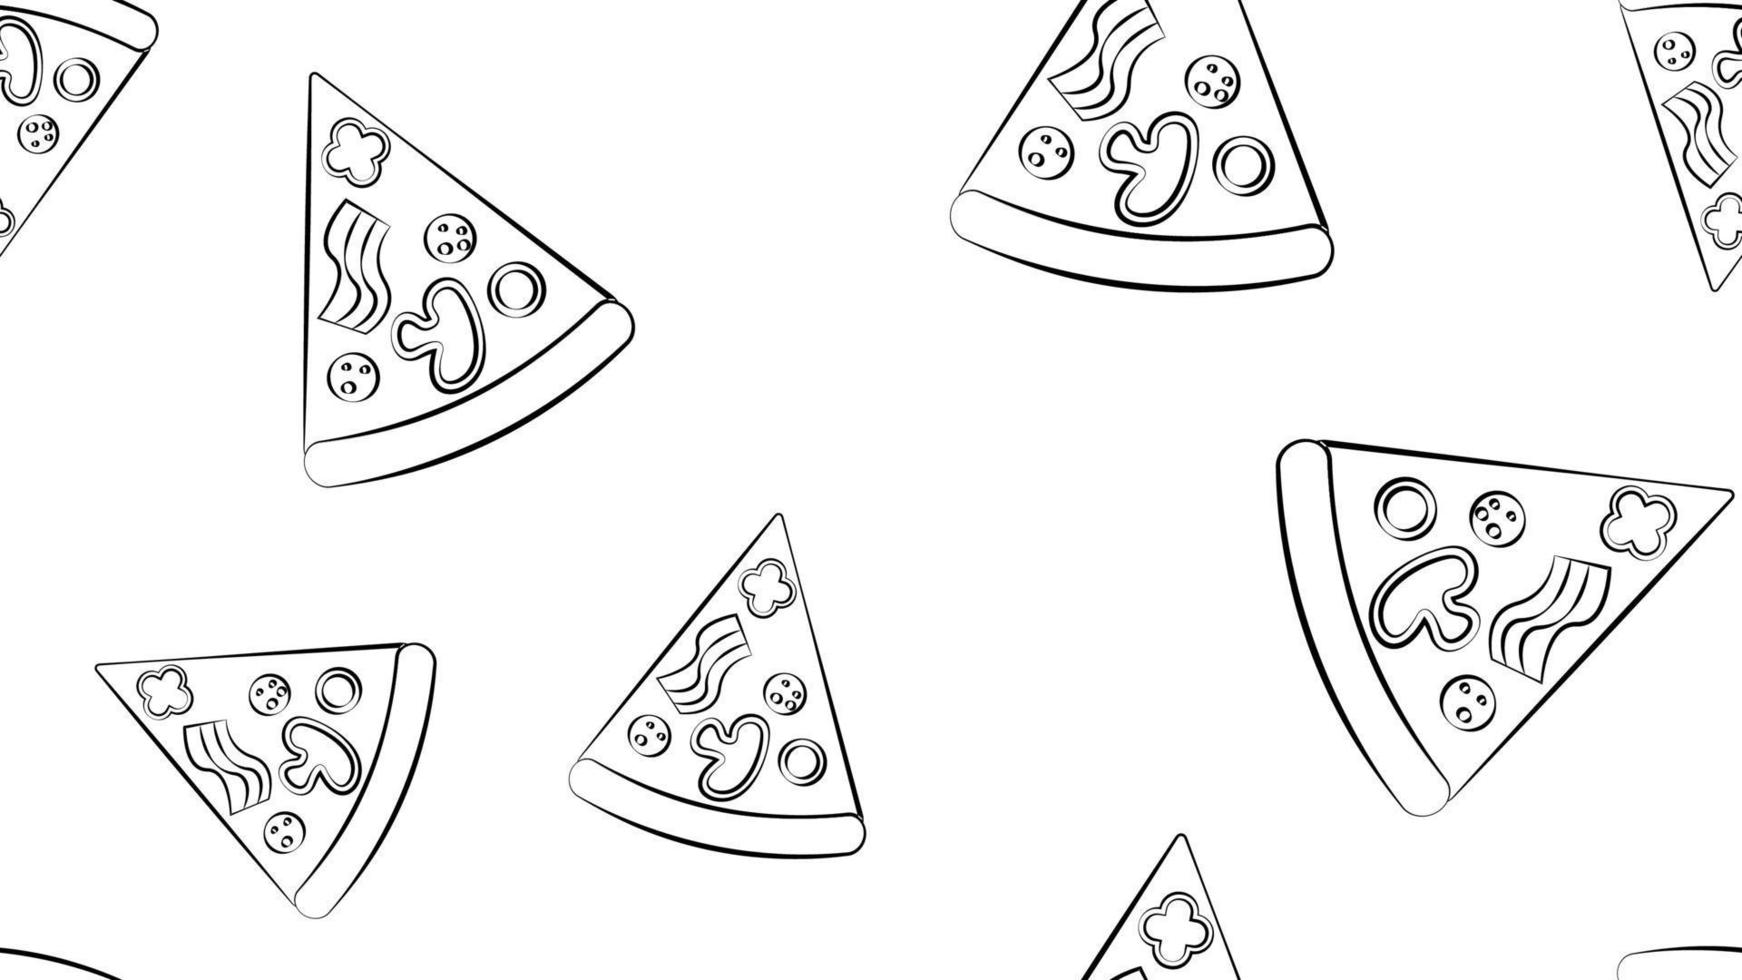 slice of pizza on thin dough, white background, vector illustration, pattern. pizza stuffed with meat, cheese. design and decor of the kitchen. black and white pattern in pencil sketch style